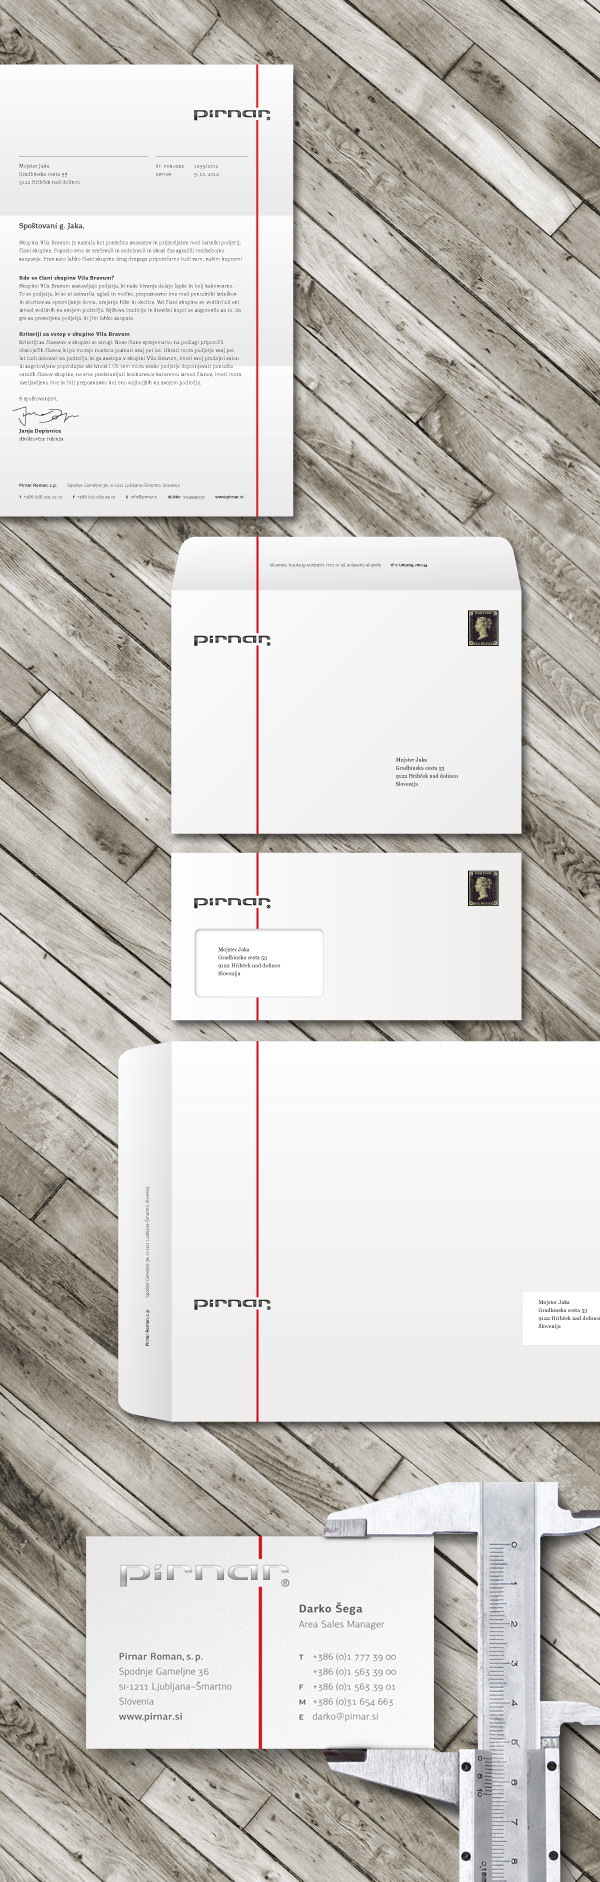 Corporate Identity visual identity Product Catalogue brochure information design paper Blind Embossing